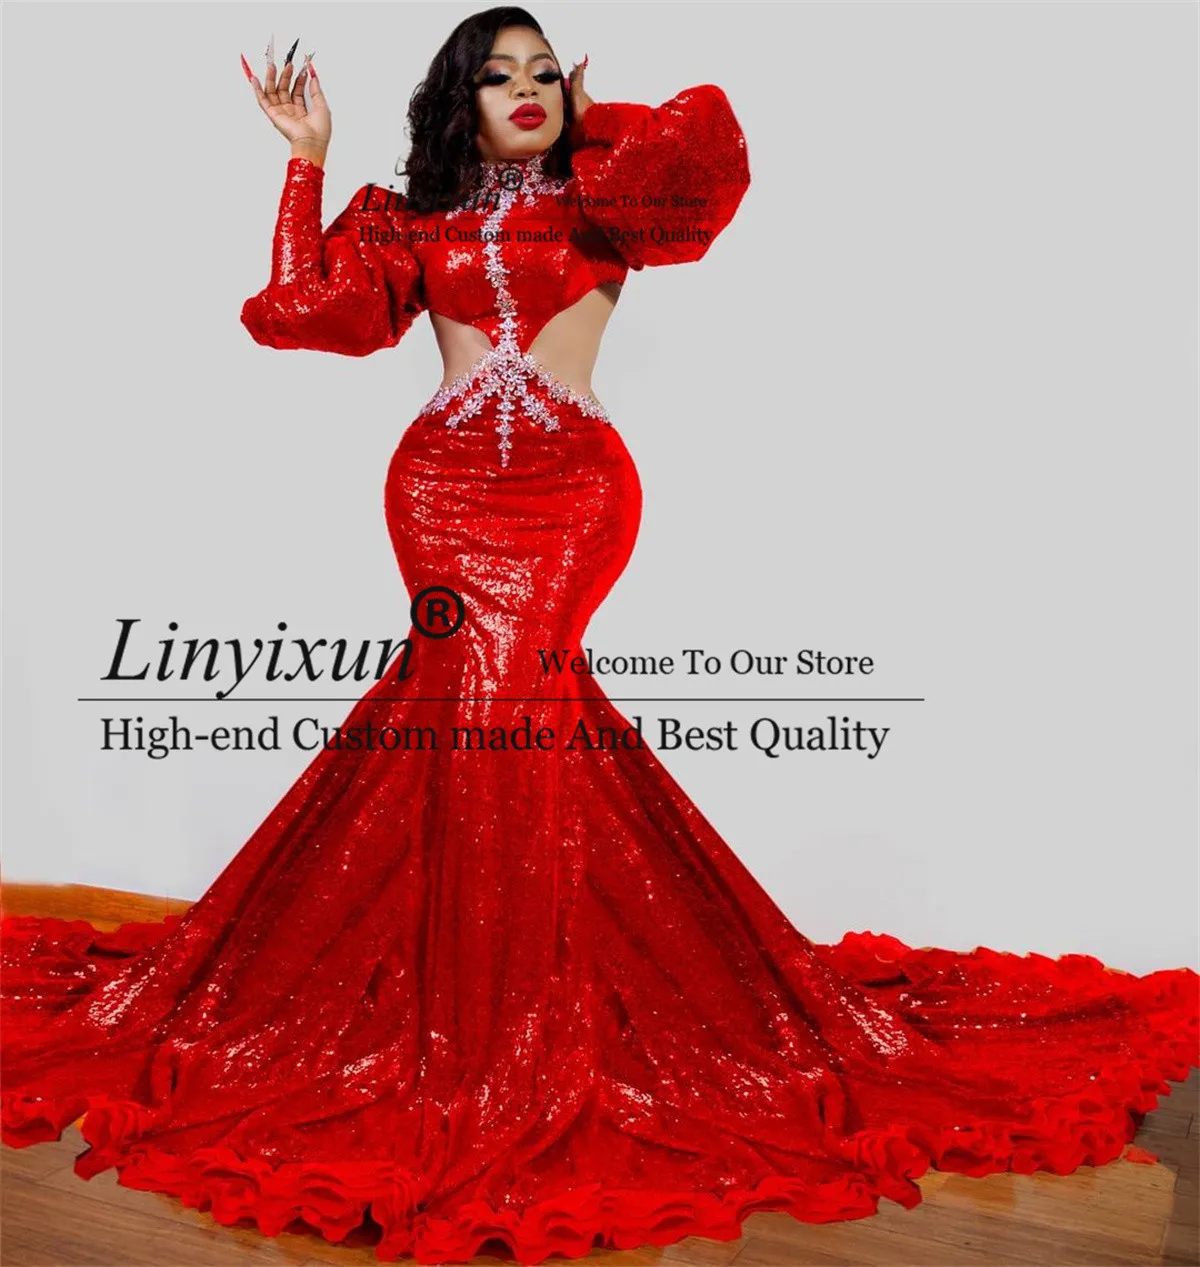 

Charming Red Sequins Mermaid Prom Dresses Long Puffy Sleeves Women Evening Party Gowns 2022 Sexy Aso Ebi robes de soirée